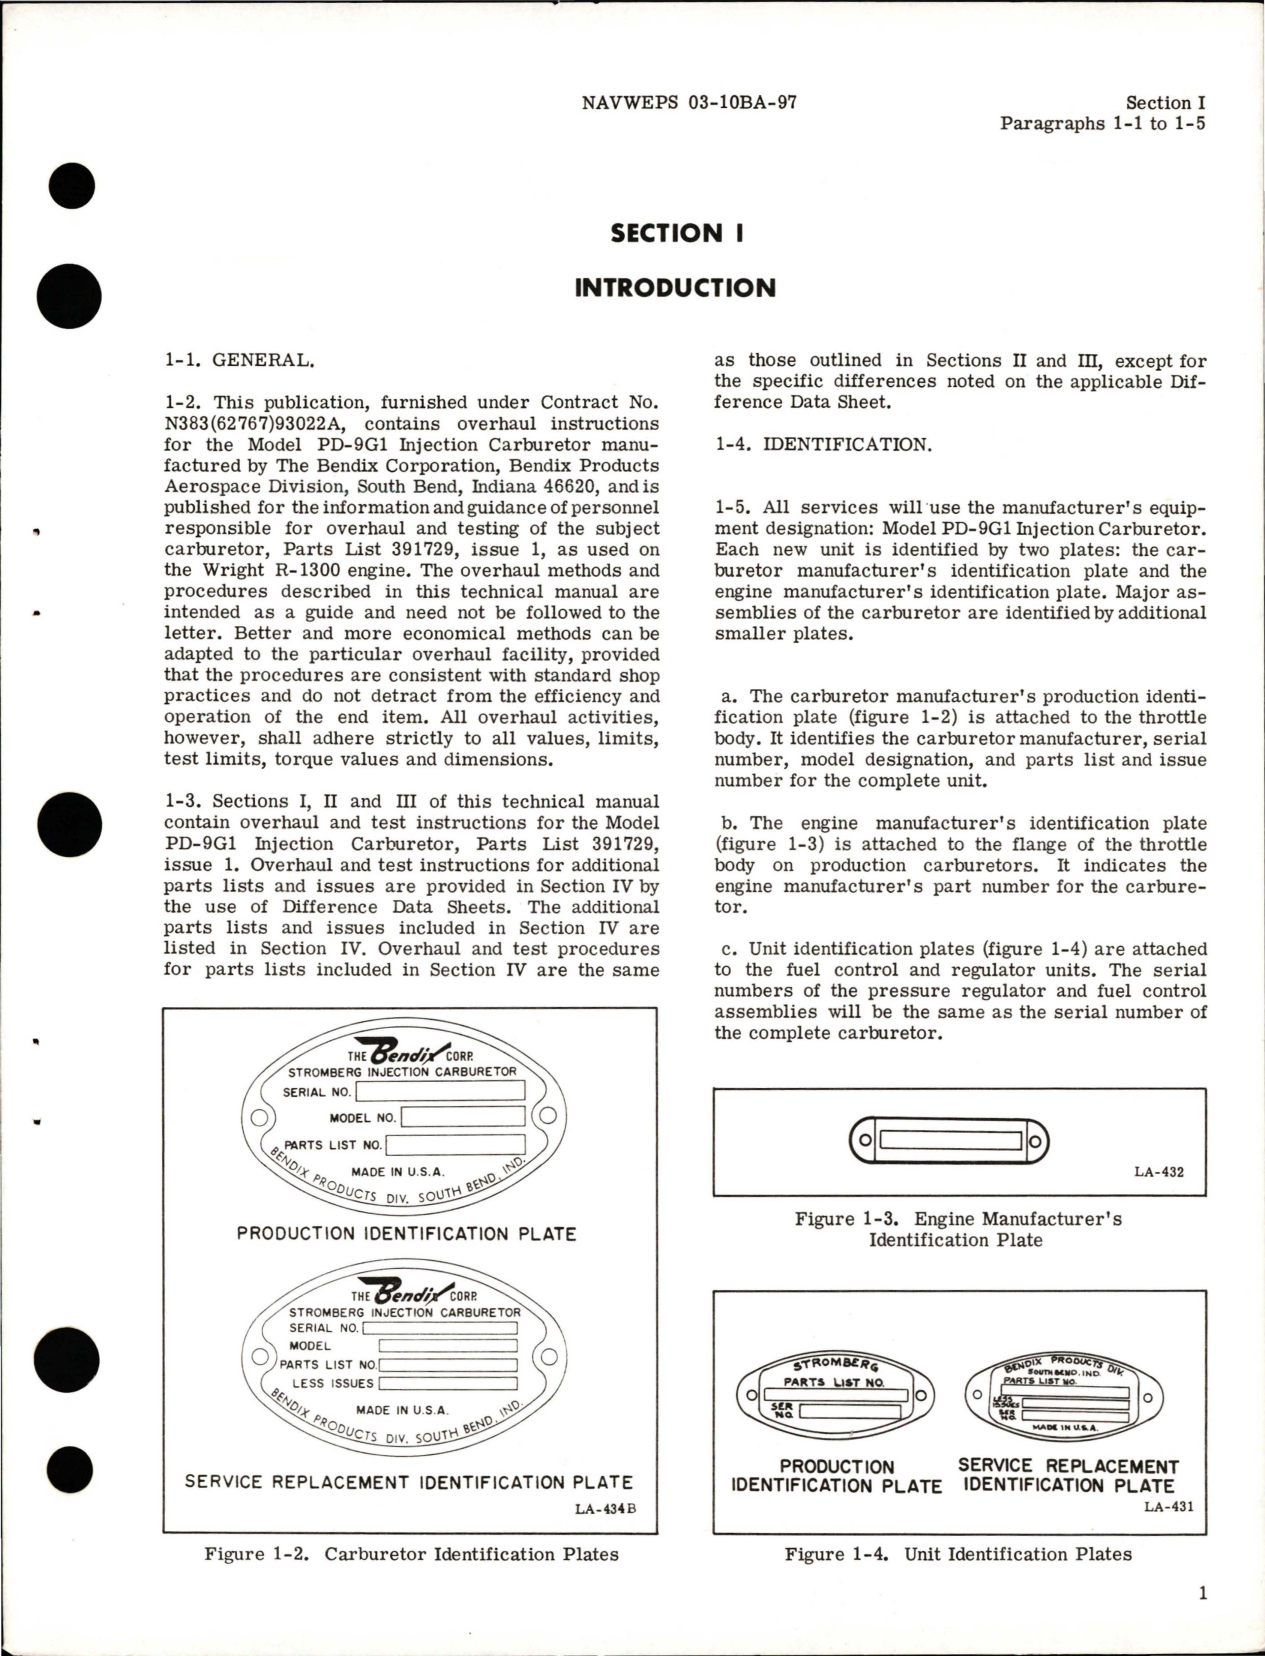 Sample page 5 from AirCorps Library document: Overhaul Instructions for Injection Carburetor - Model PD-9G1